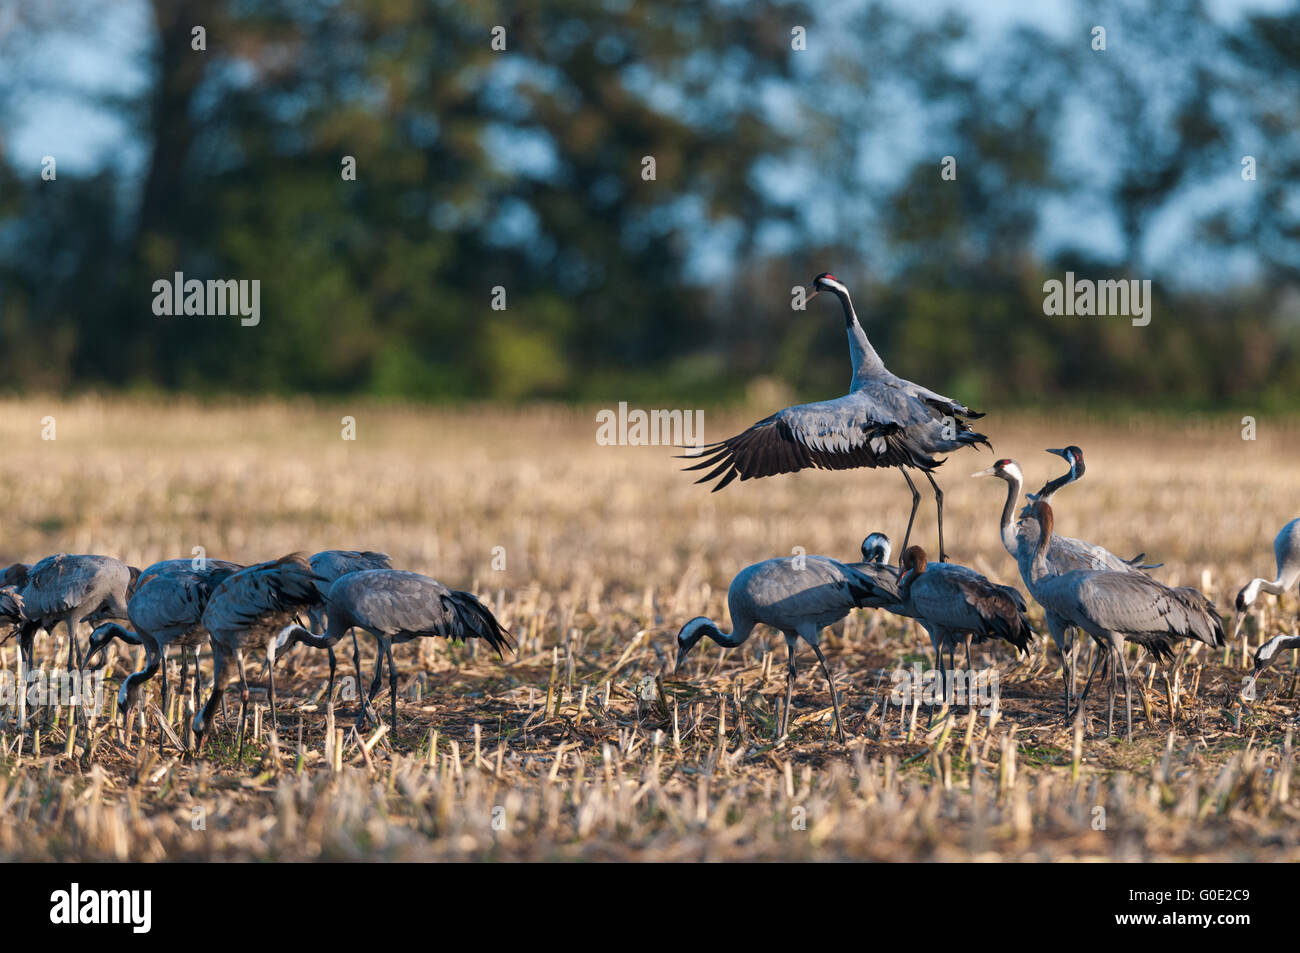 Common cranes from Germany Stock Photo